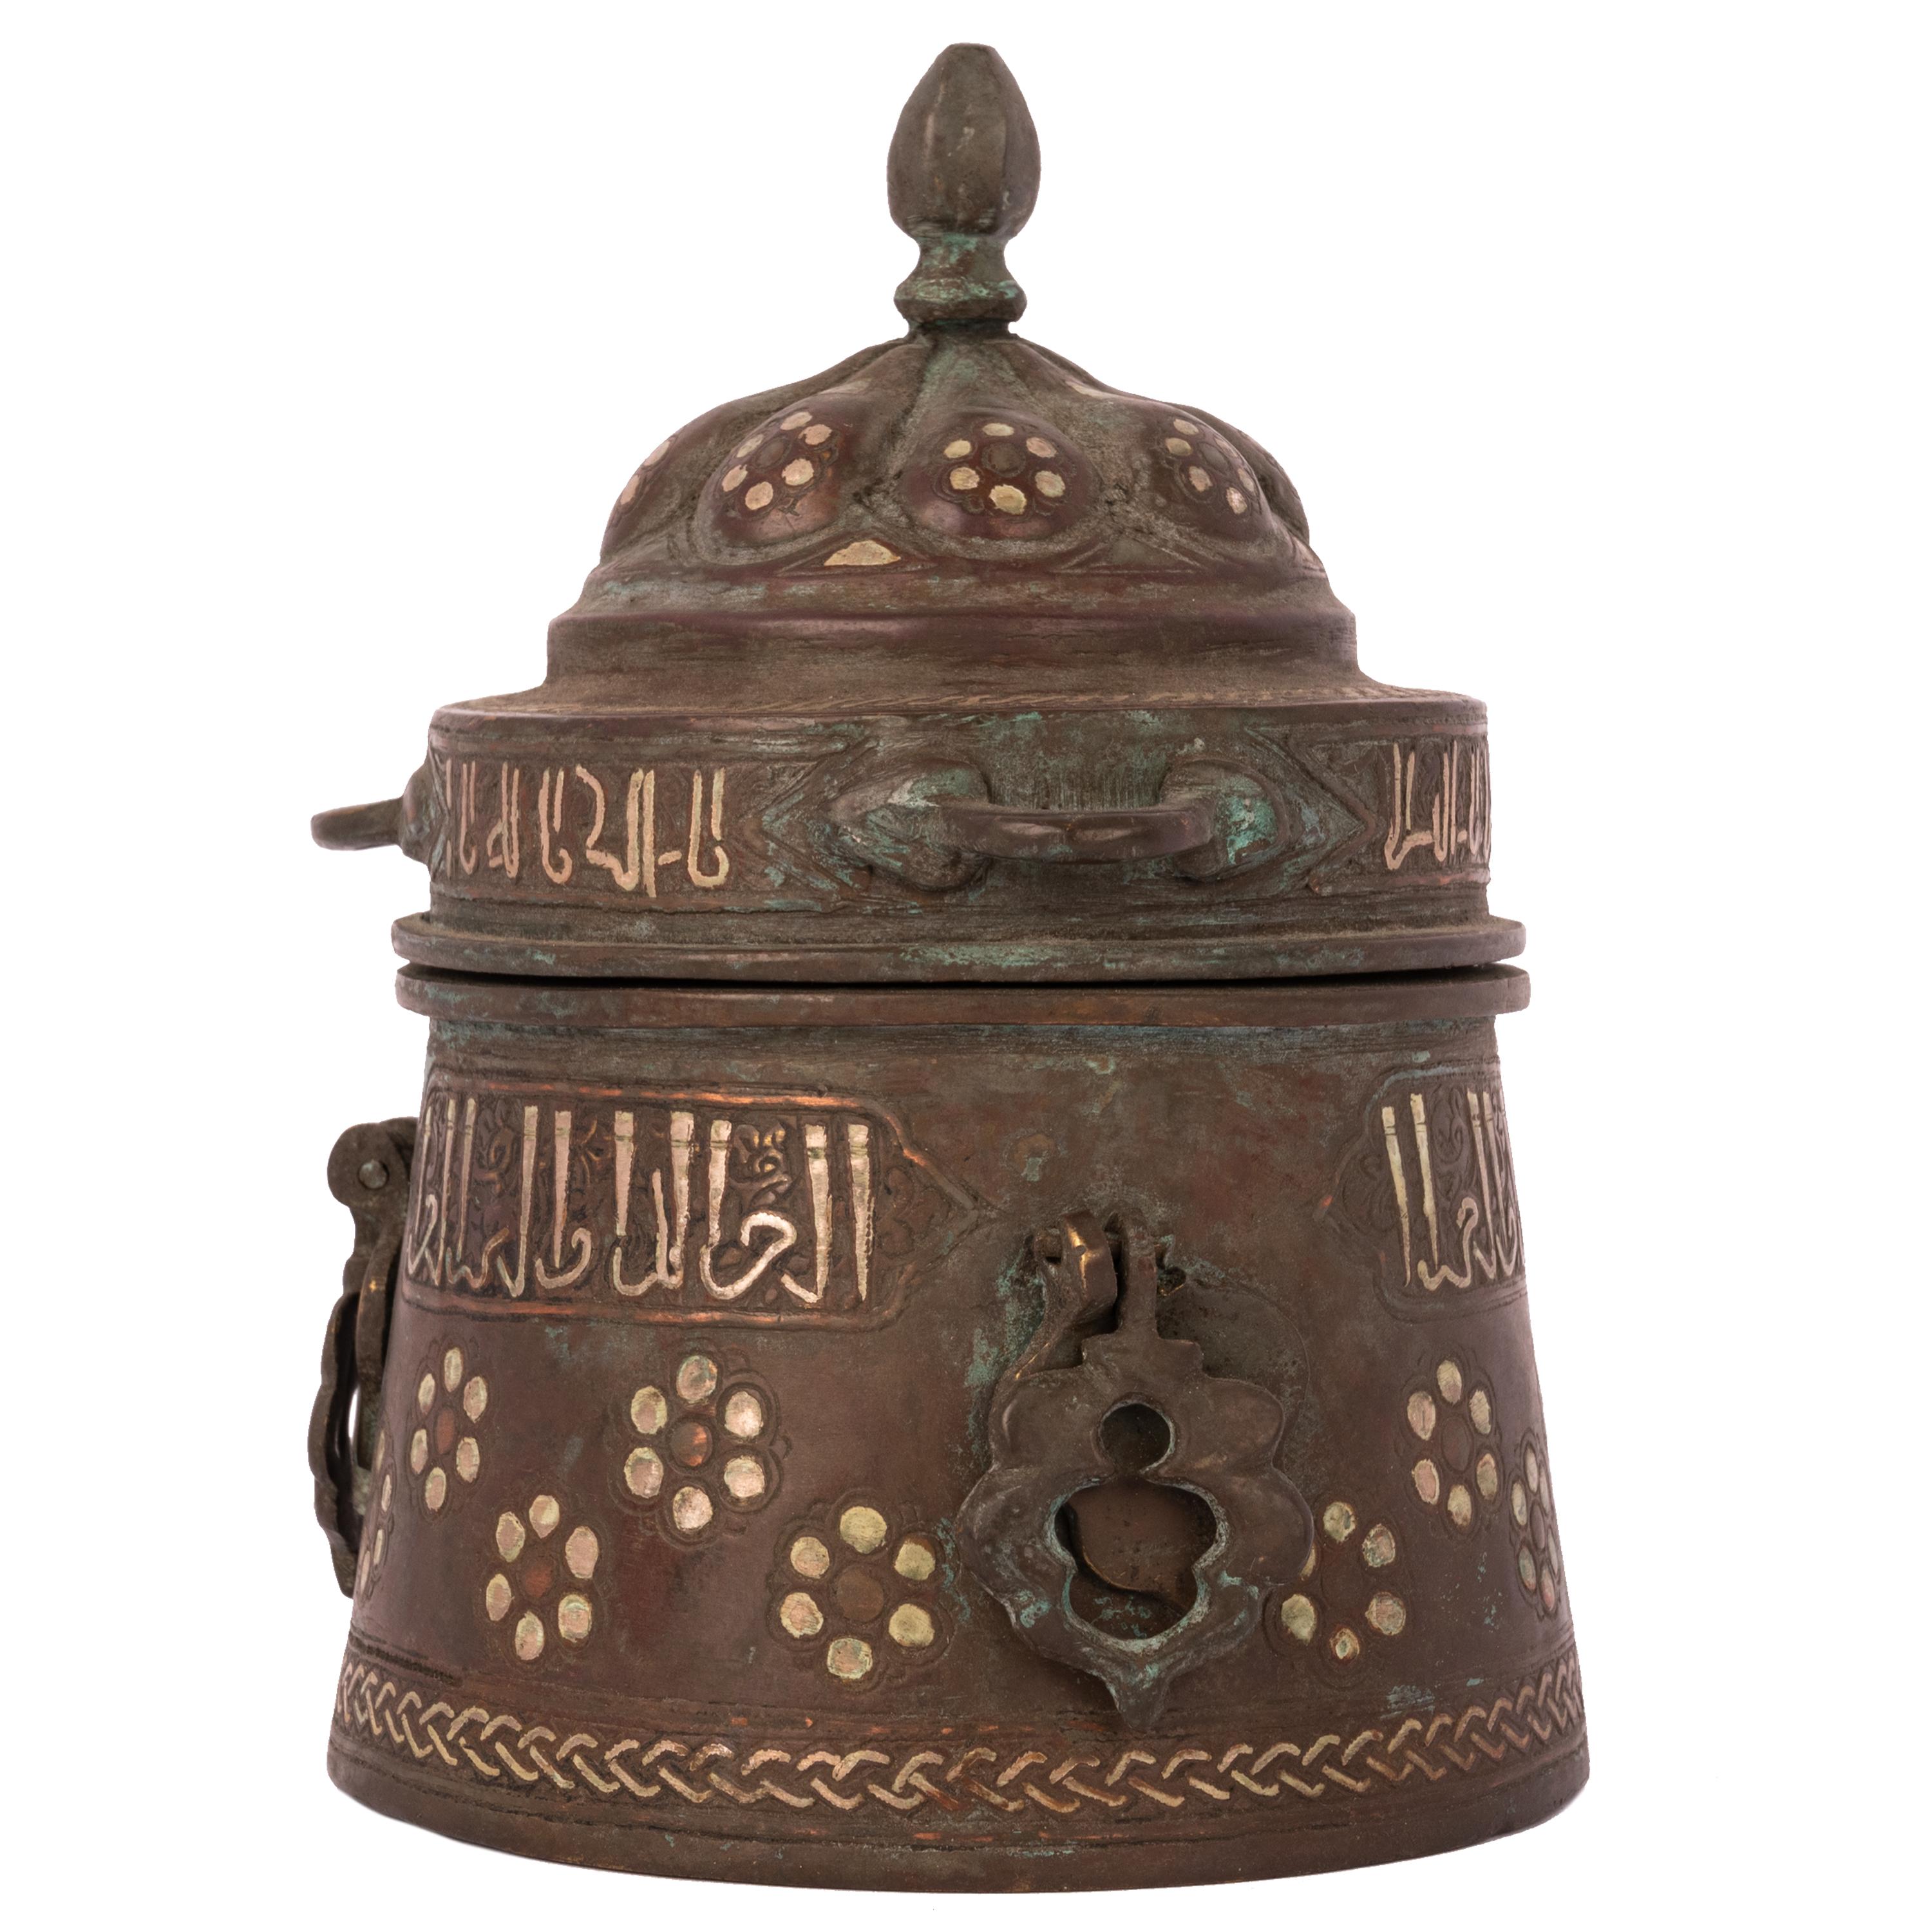 An ancient Khurasan silver and copper inlaid bronze inkwell, Eastern Persia or Herat, 12th-13th century, from an important private Middle East collection.
The inkwell is of cylindrical shape with a domed shaped lid with dot shaped silver and copper